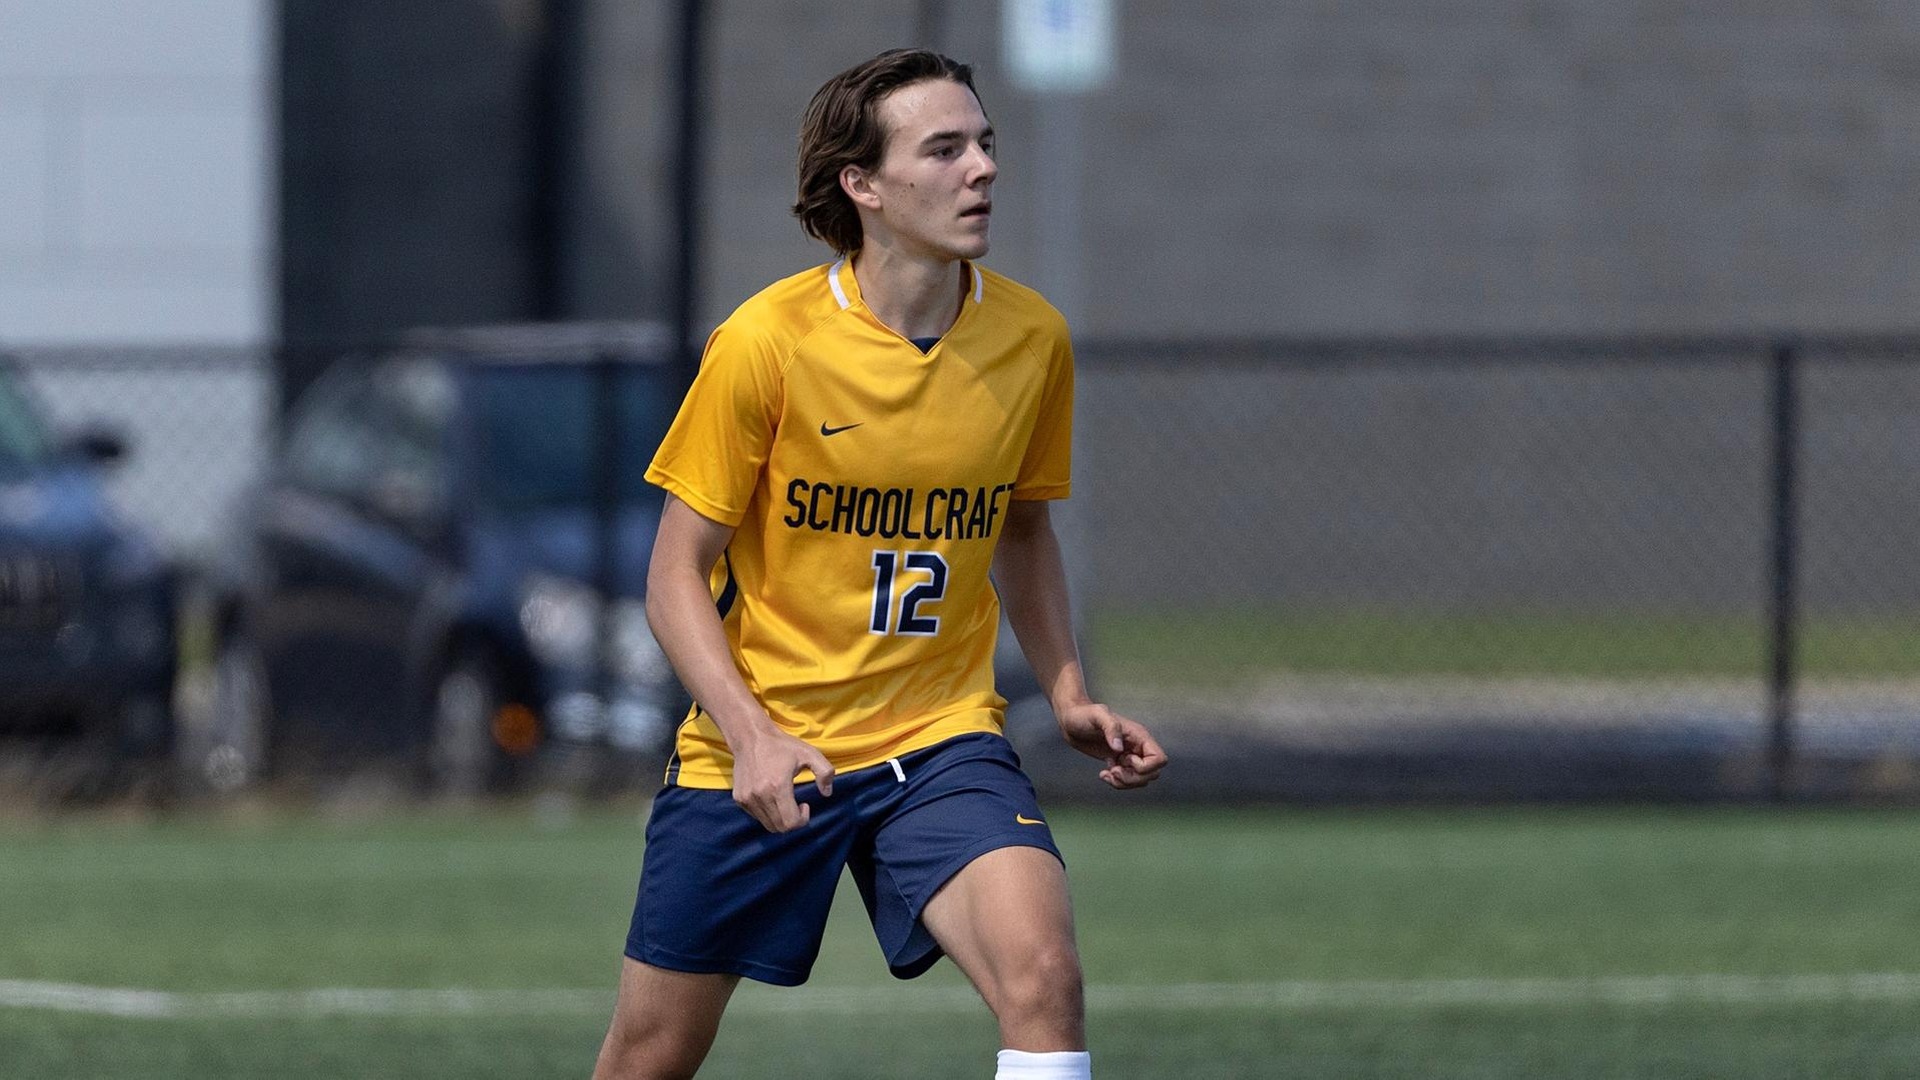 Men's Soccer Pushes Record to 7-2-0 with 10-0 Victory